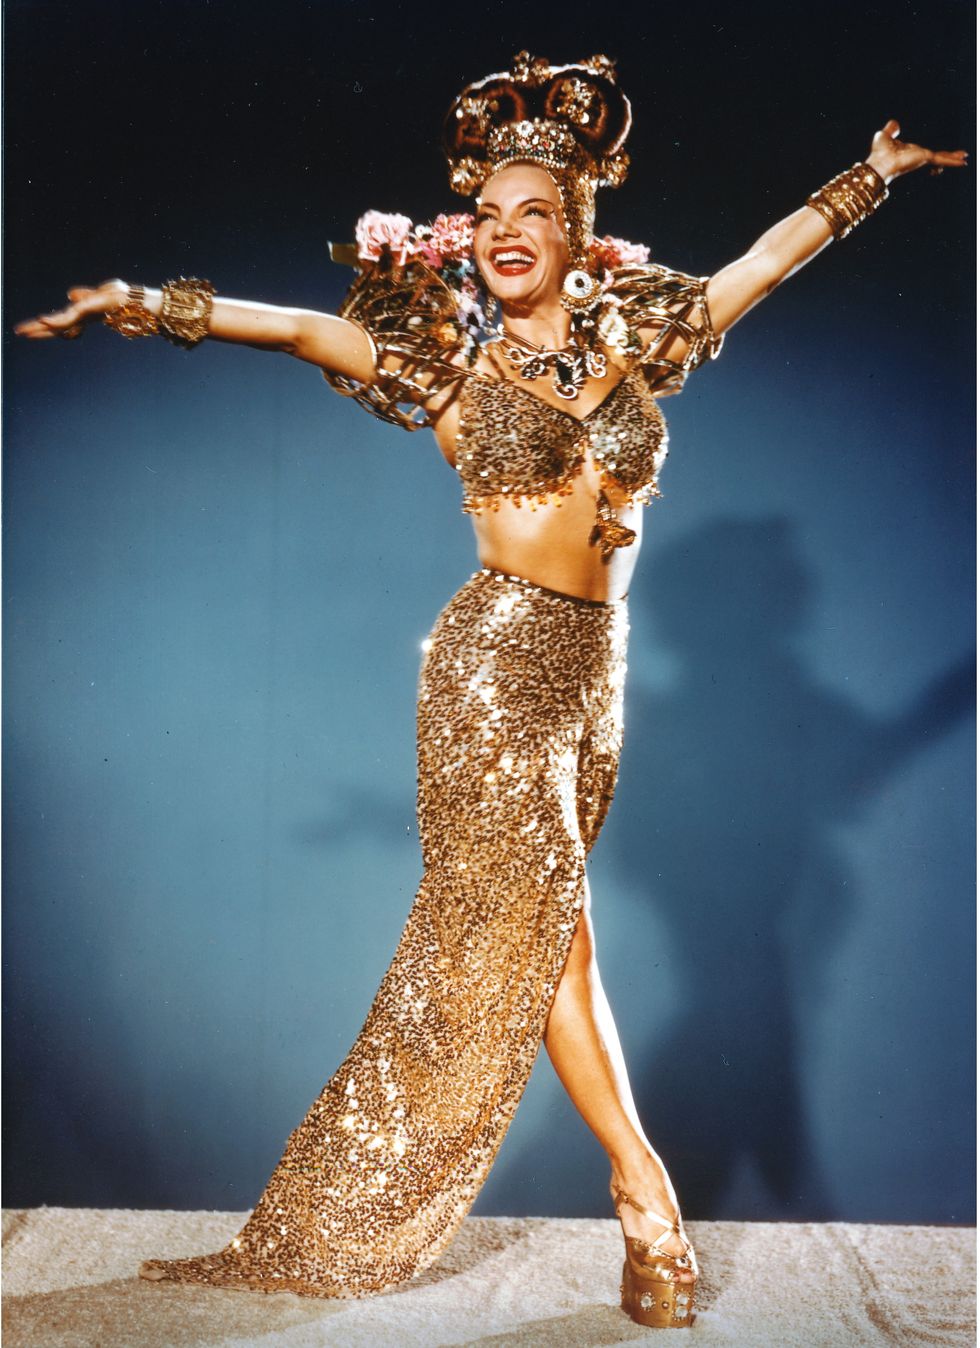 carmen miranda 1909 1955, portuguese born brazilian singer, actress and dancer, wearing a long gold sequuinned split skirt, with a matching bra top and various gold accoutrements, including a gold headdress, with her outstretched either side of her, circa 1950 photo by silver screen collectiongetty images